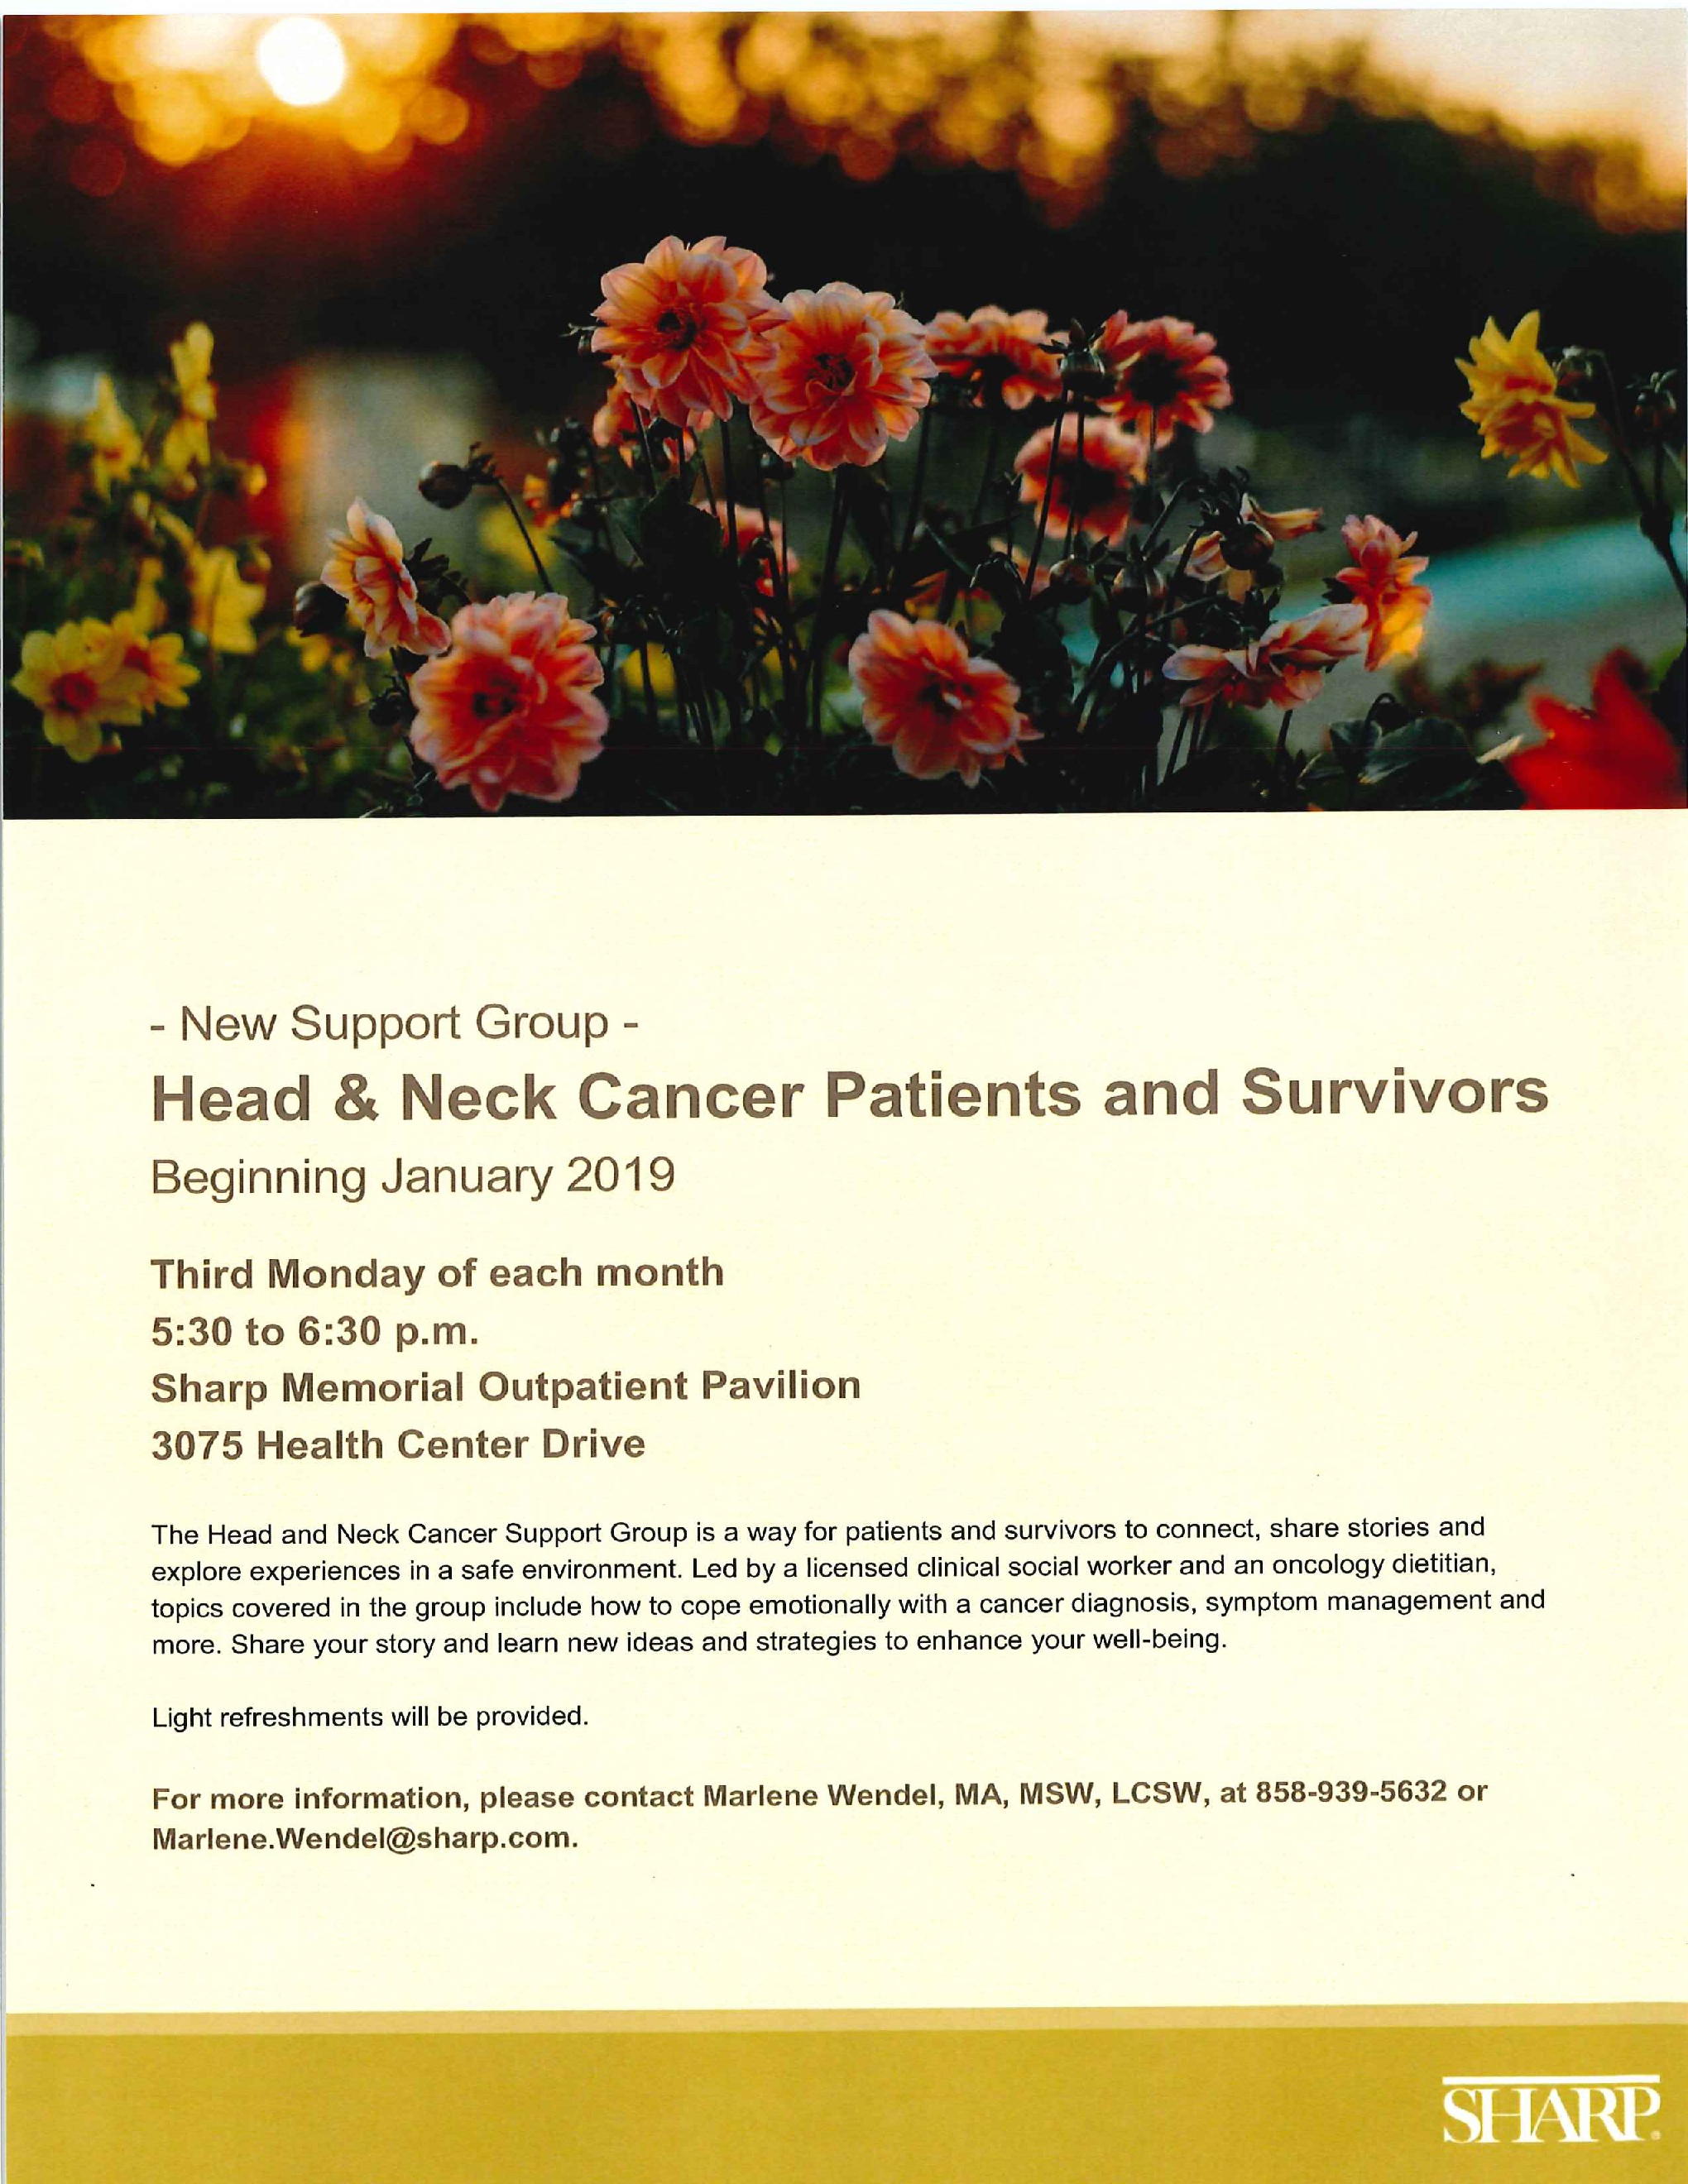 Head and Neck Cancer Patients and Survivors Support Group